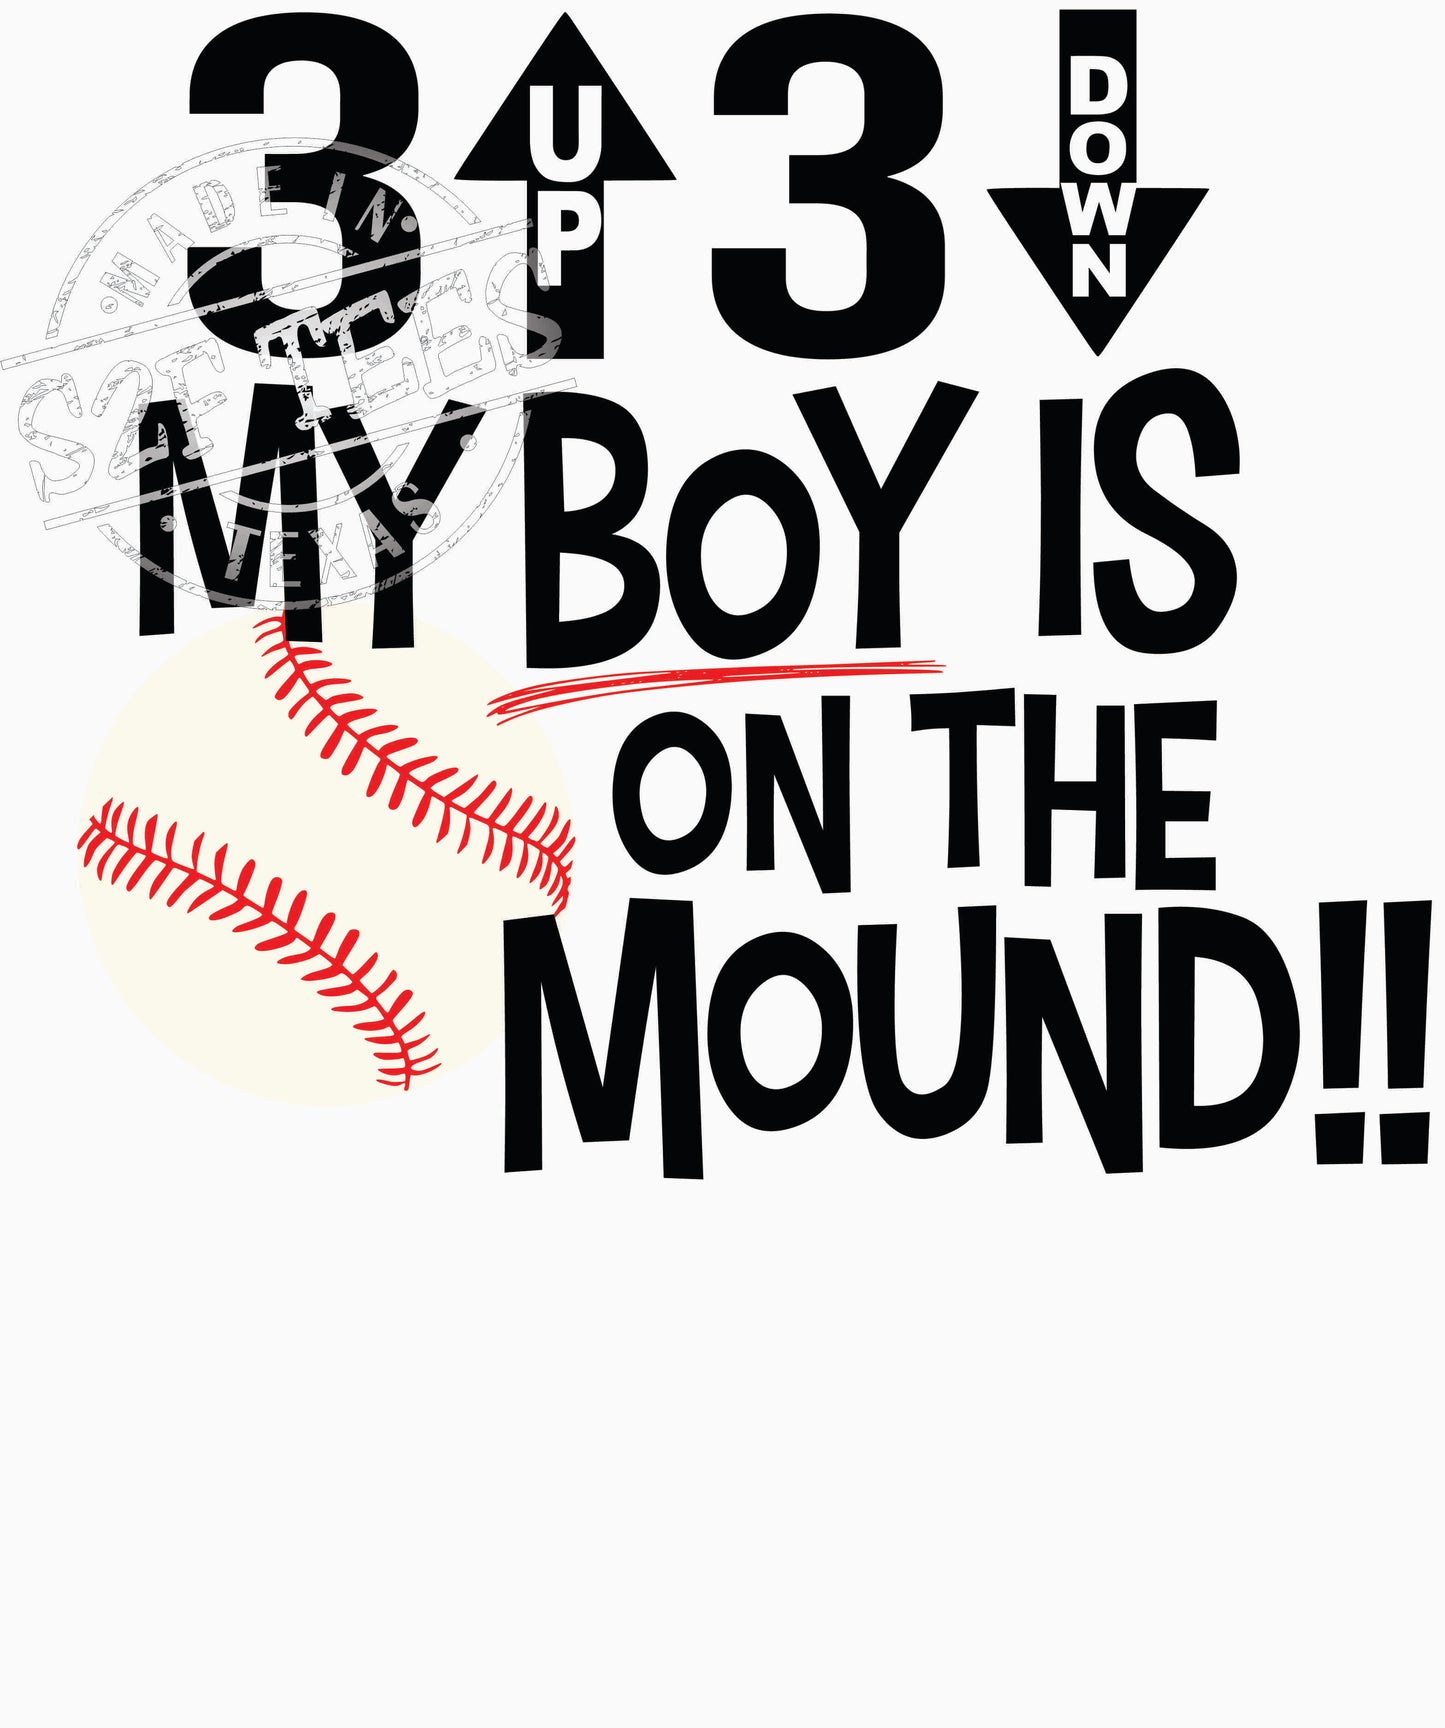 3 up 3 down my boy is on the mound